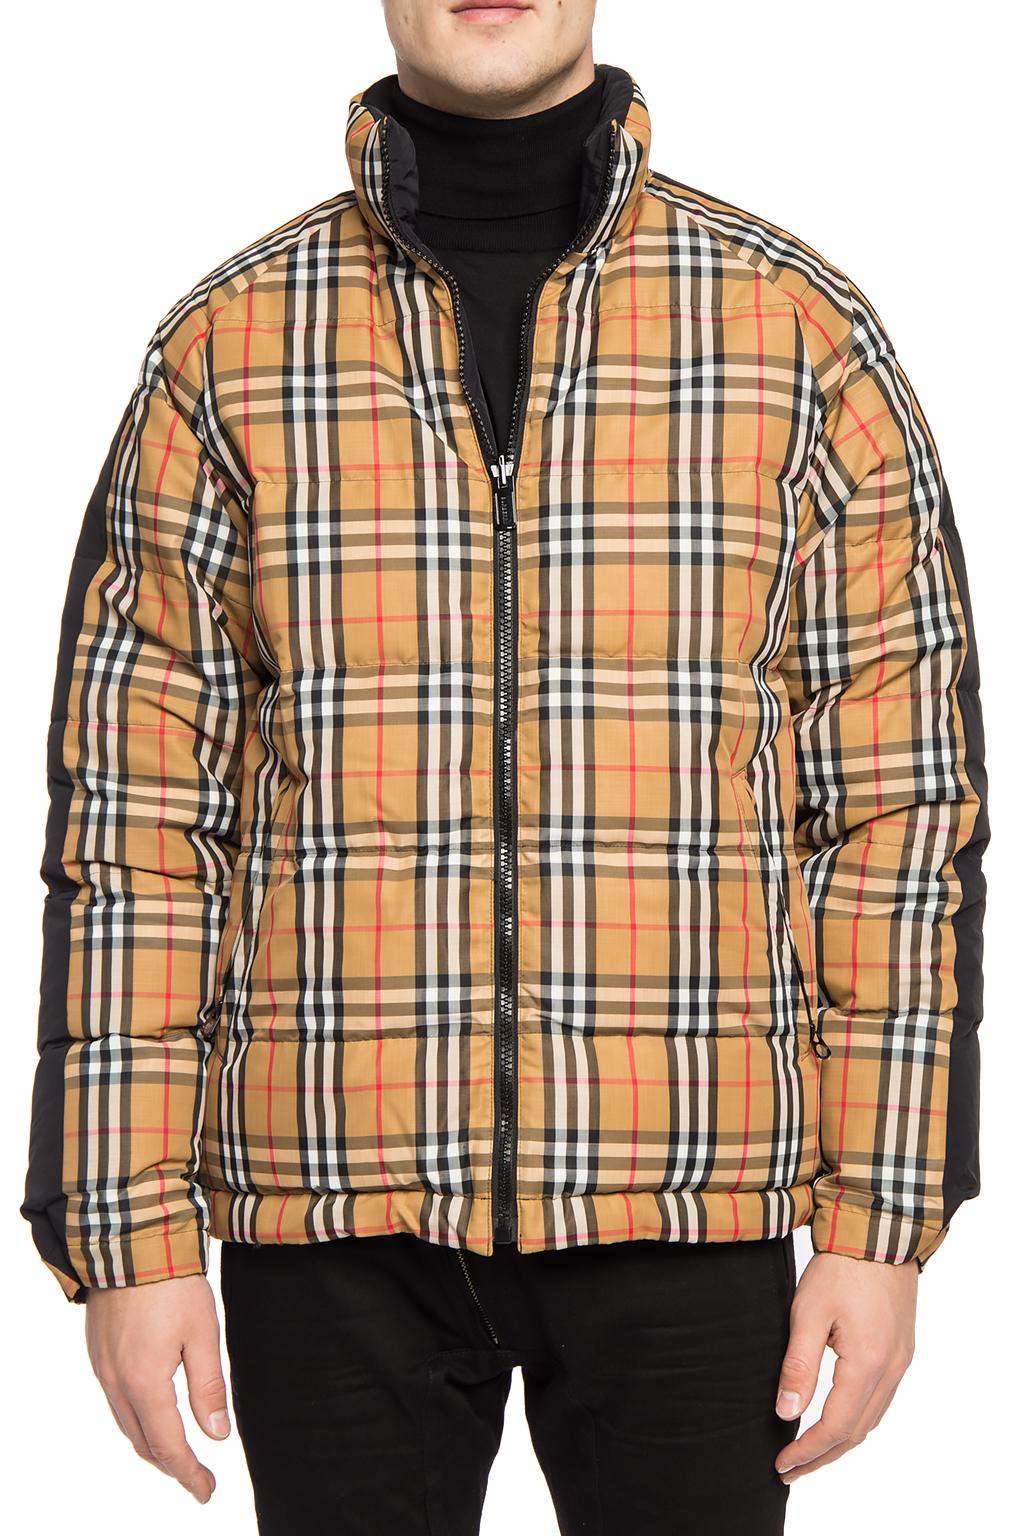 MEN'S BURBERRY REVERSIBLE Vintage CHECKED PUFFER JACKET SIZE XS